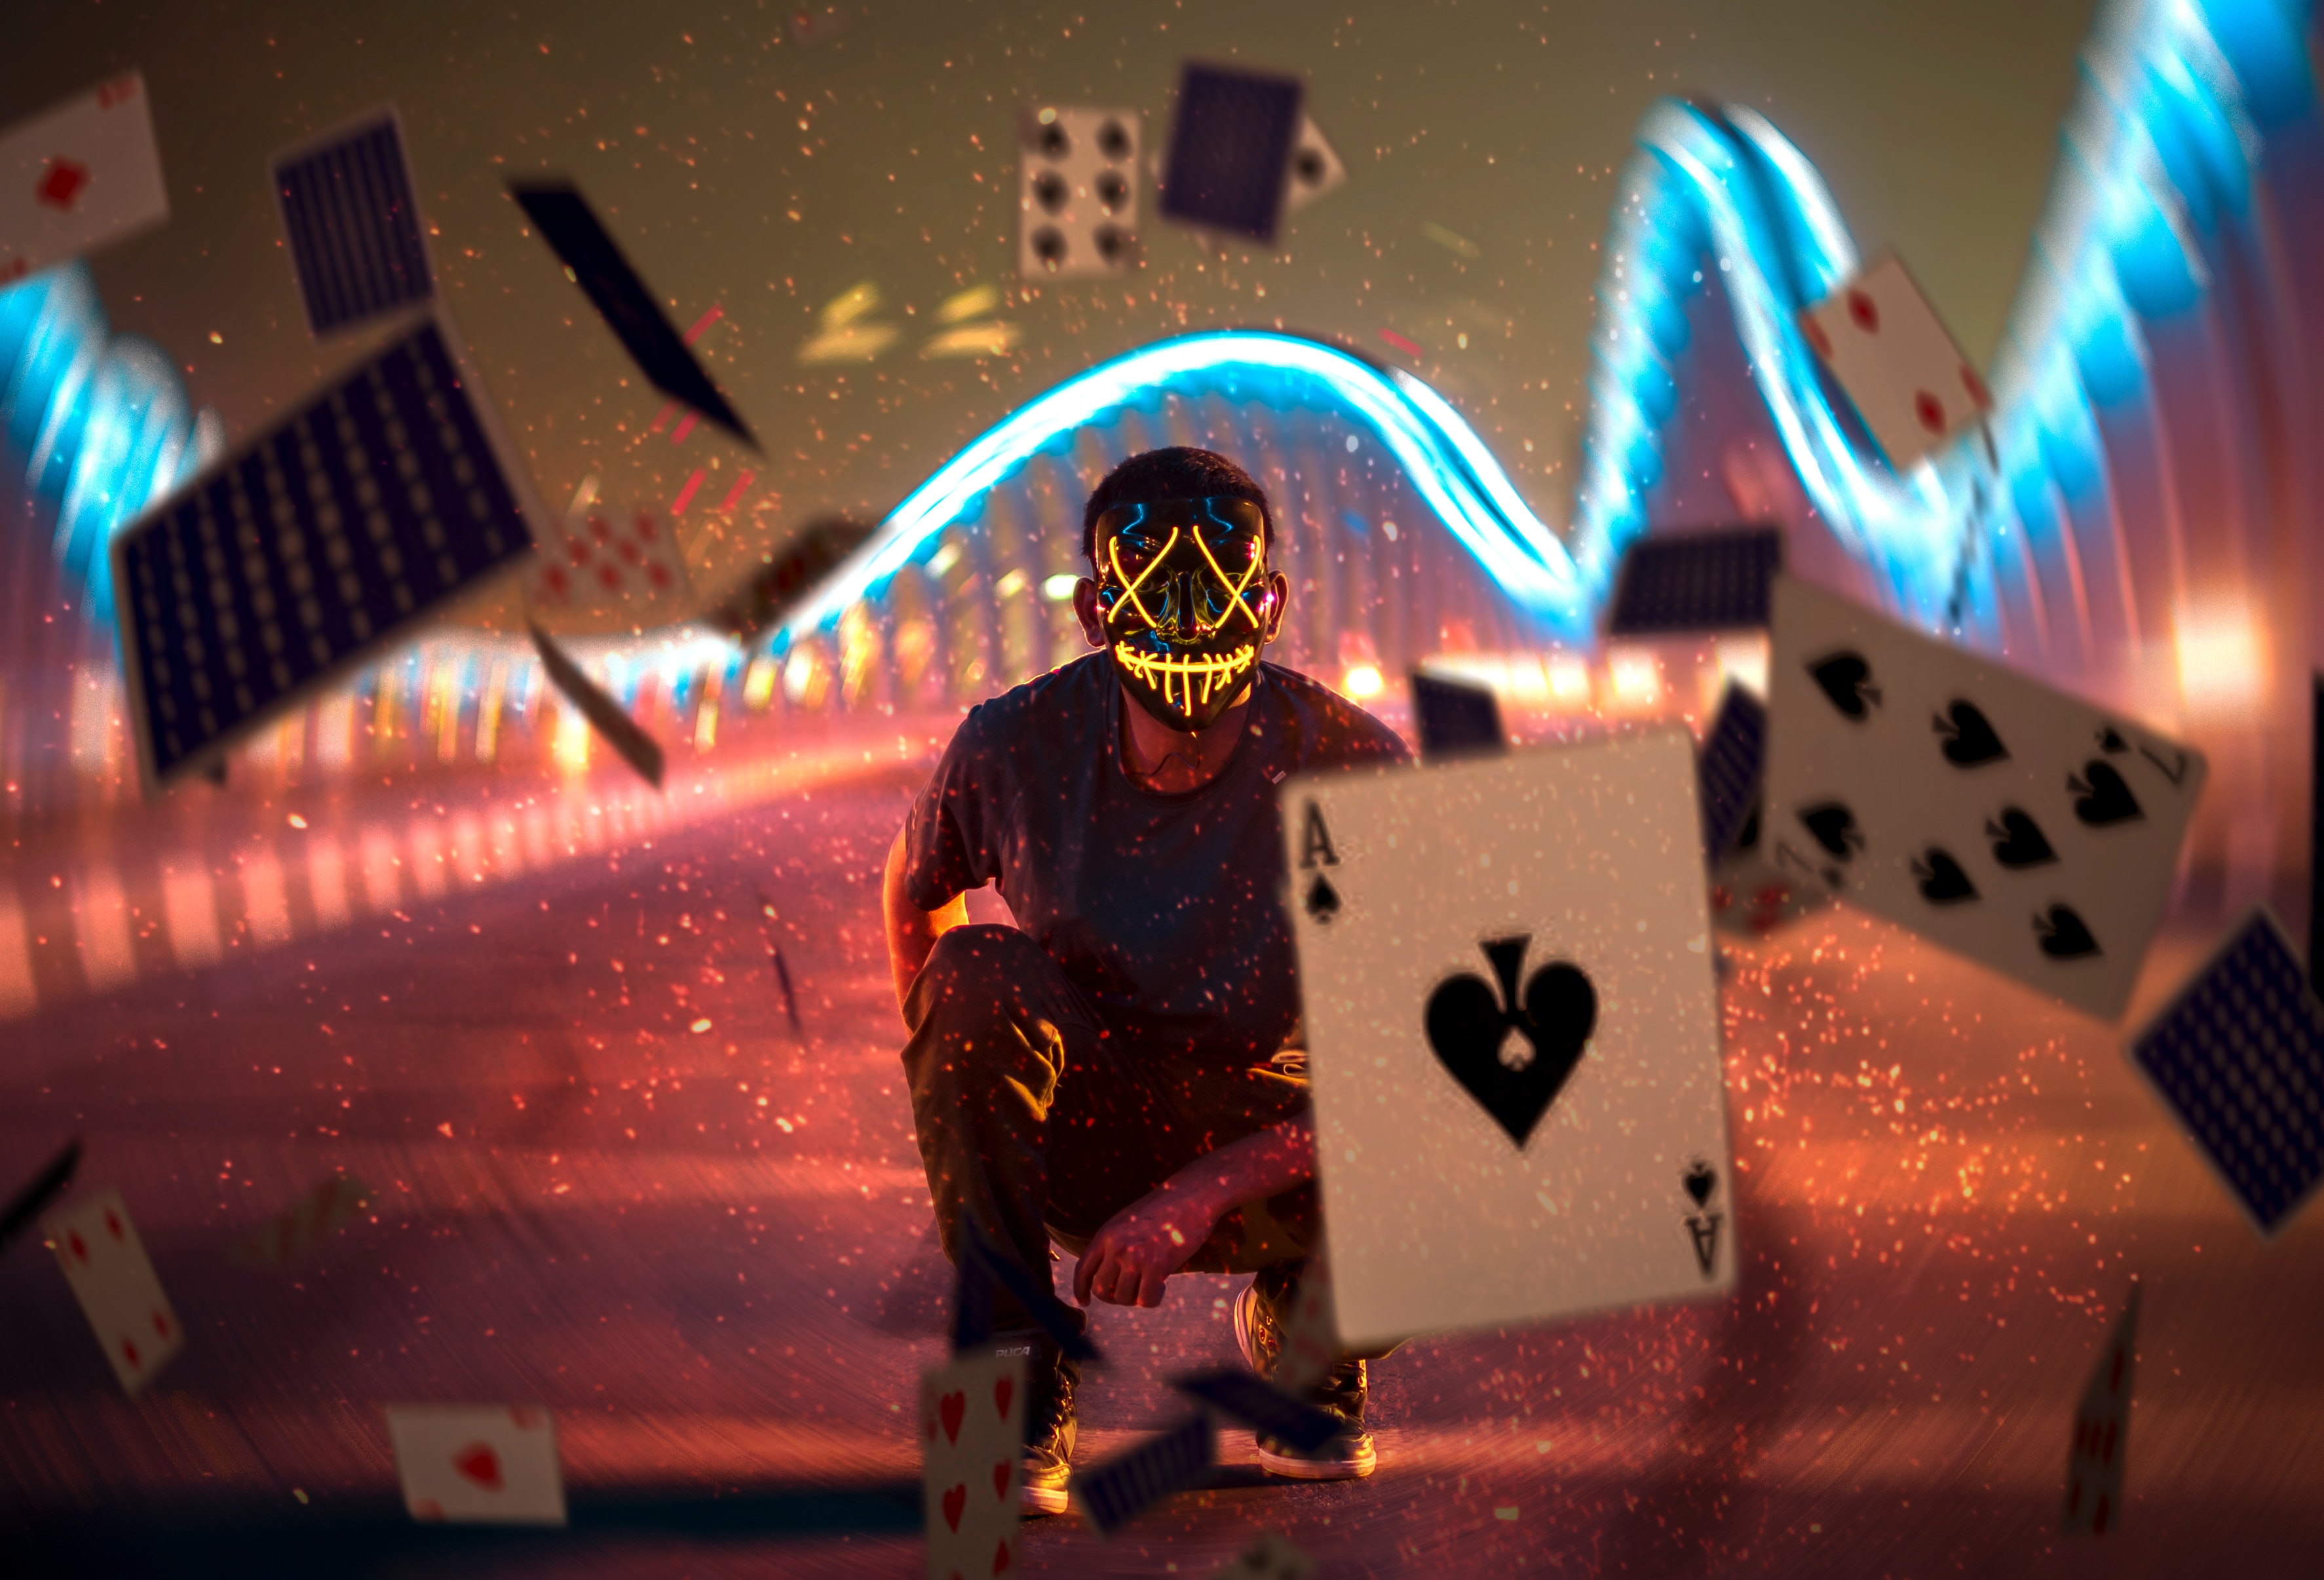 General 3547x2411 motion blur people mask men magic cards aces creativity floating lights long exposure neon night photography theme parks Ace of Spades digital art